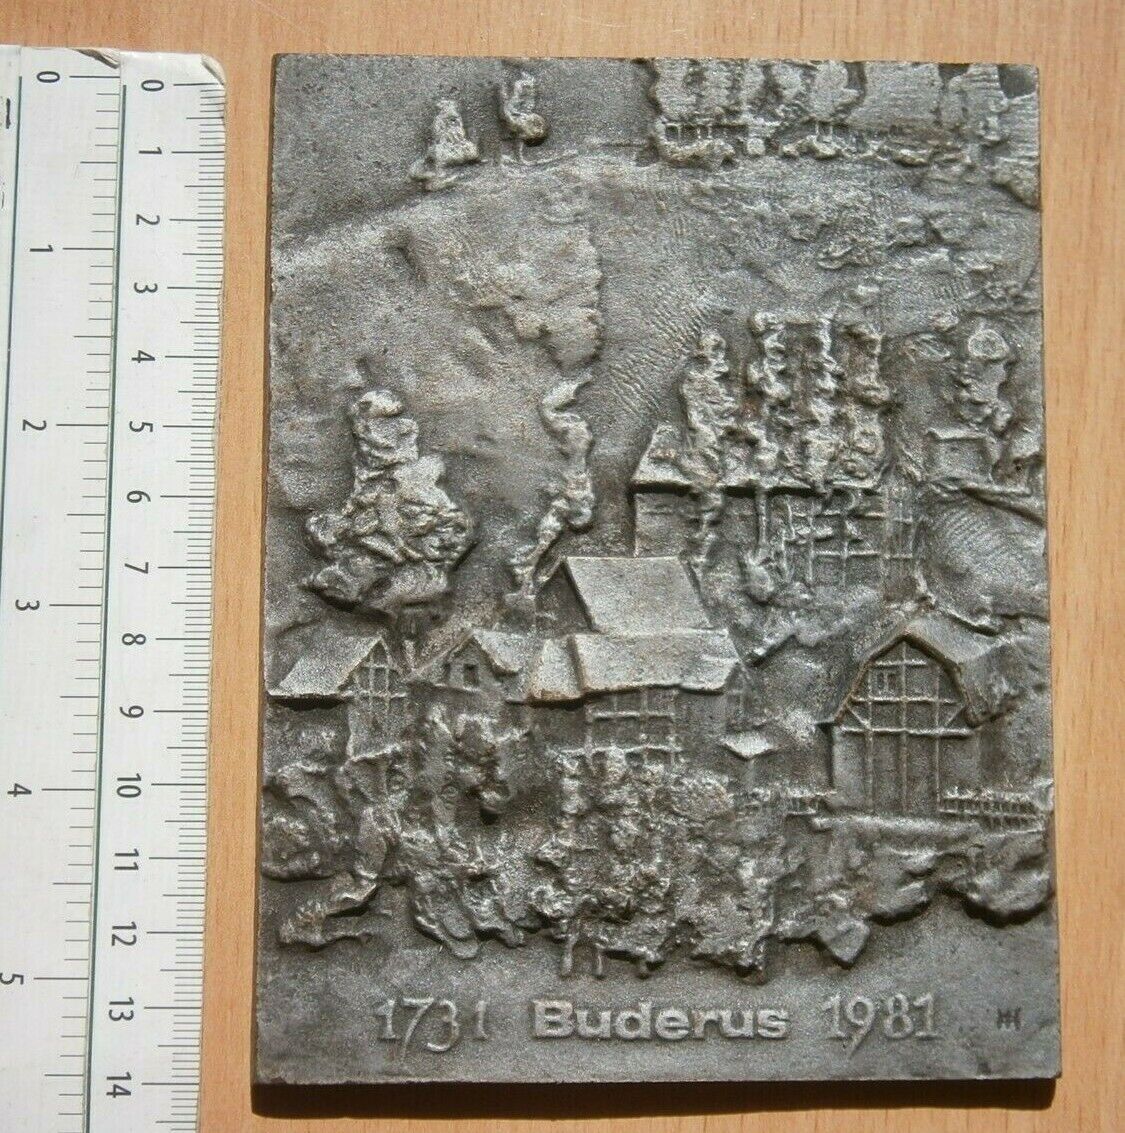 Buderus GERMANY COMPANY PLAQUE 1731 1981 Cast Iron Art Relief ADVERTISE AD DECOR